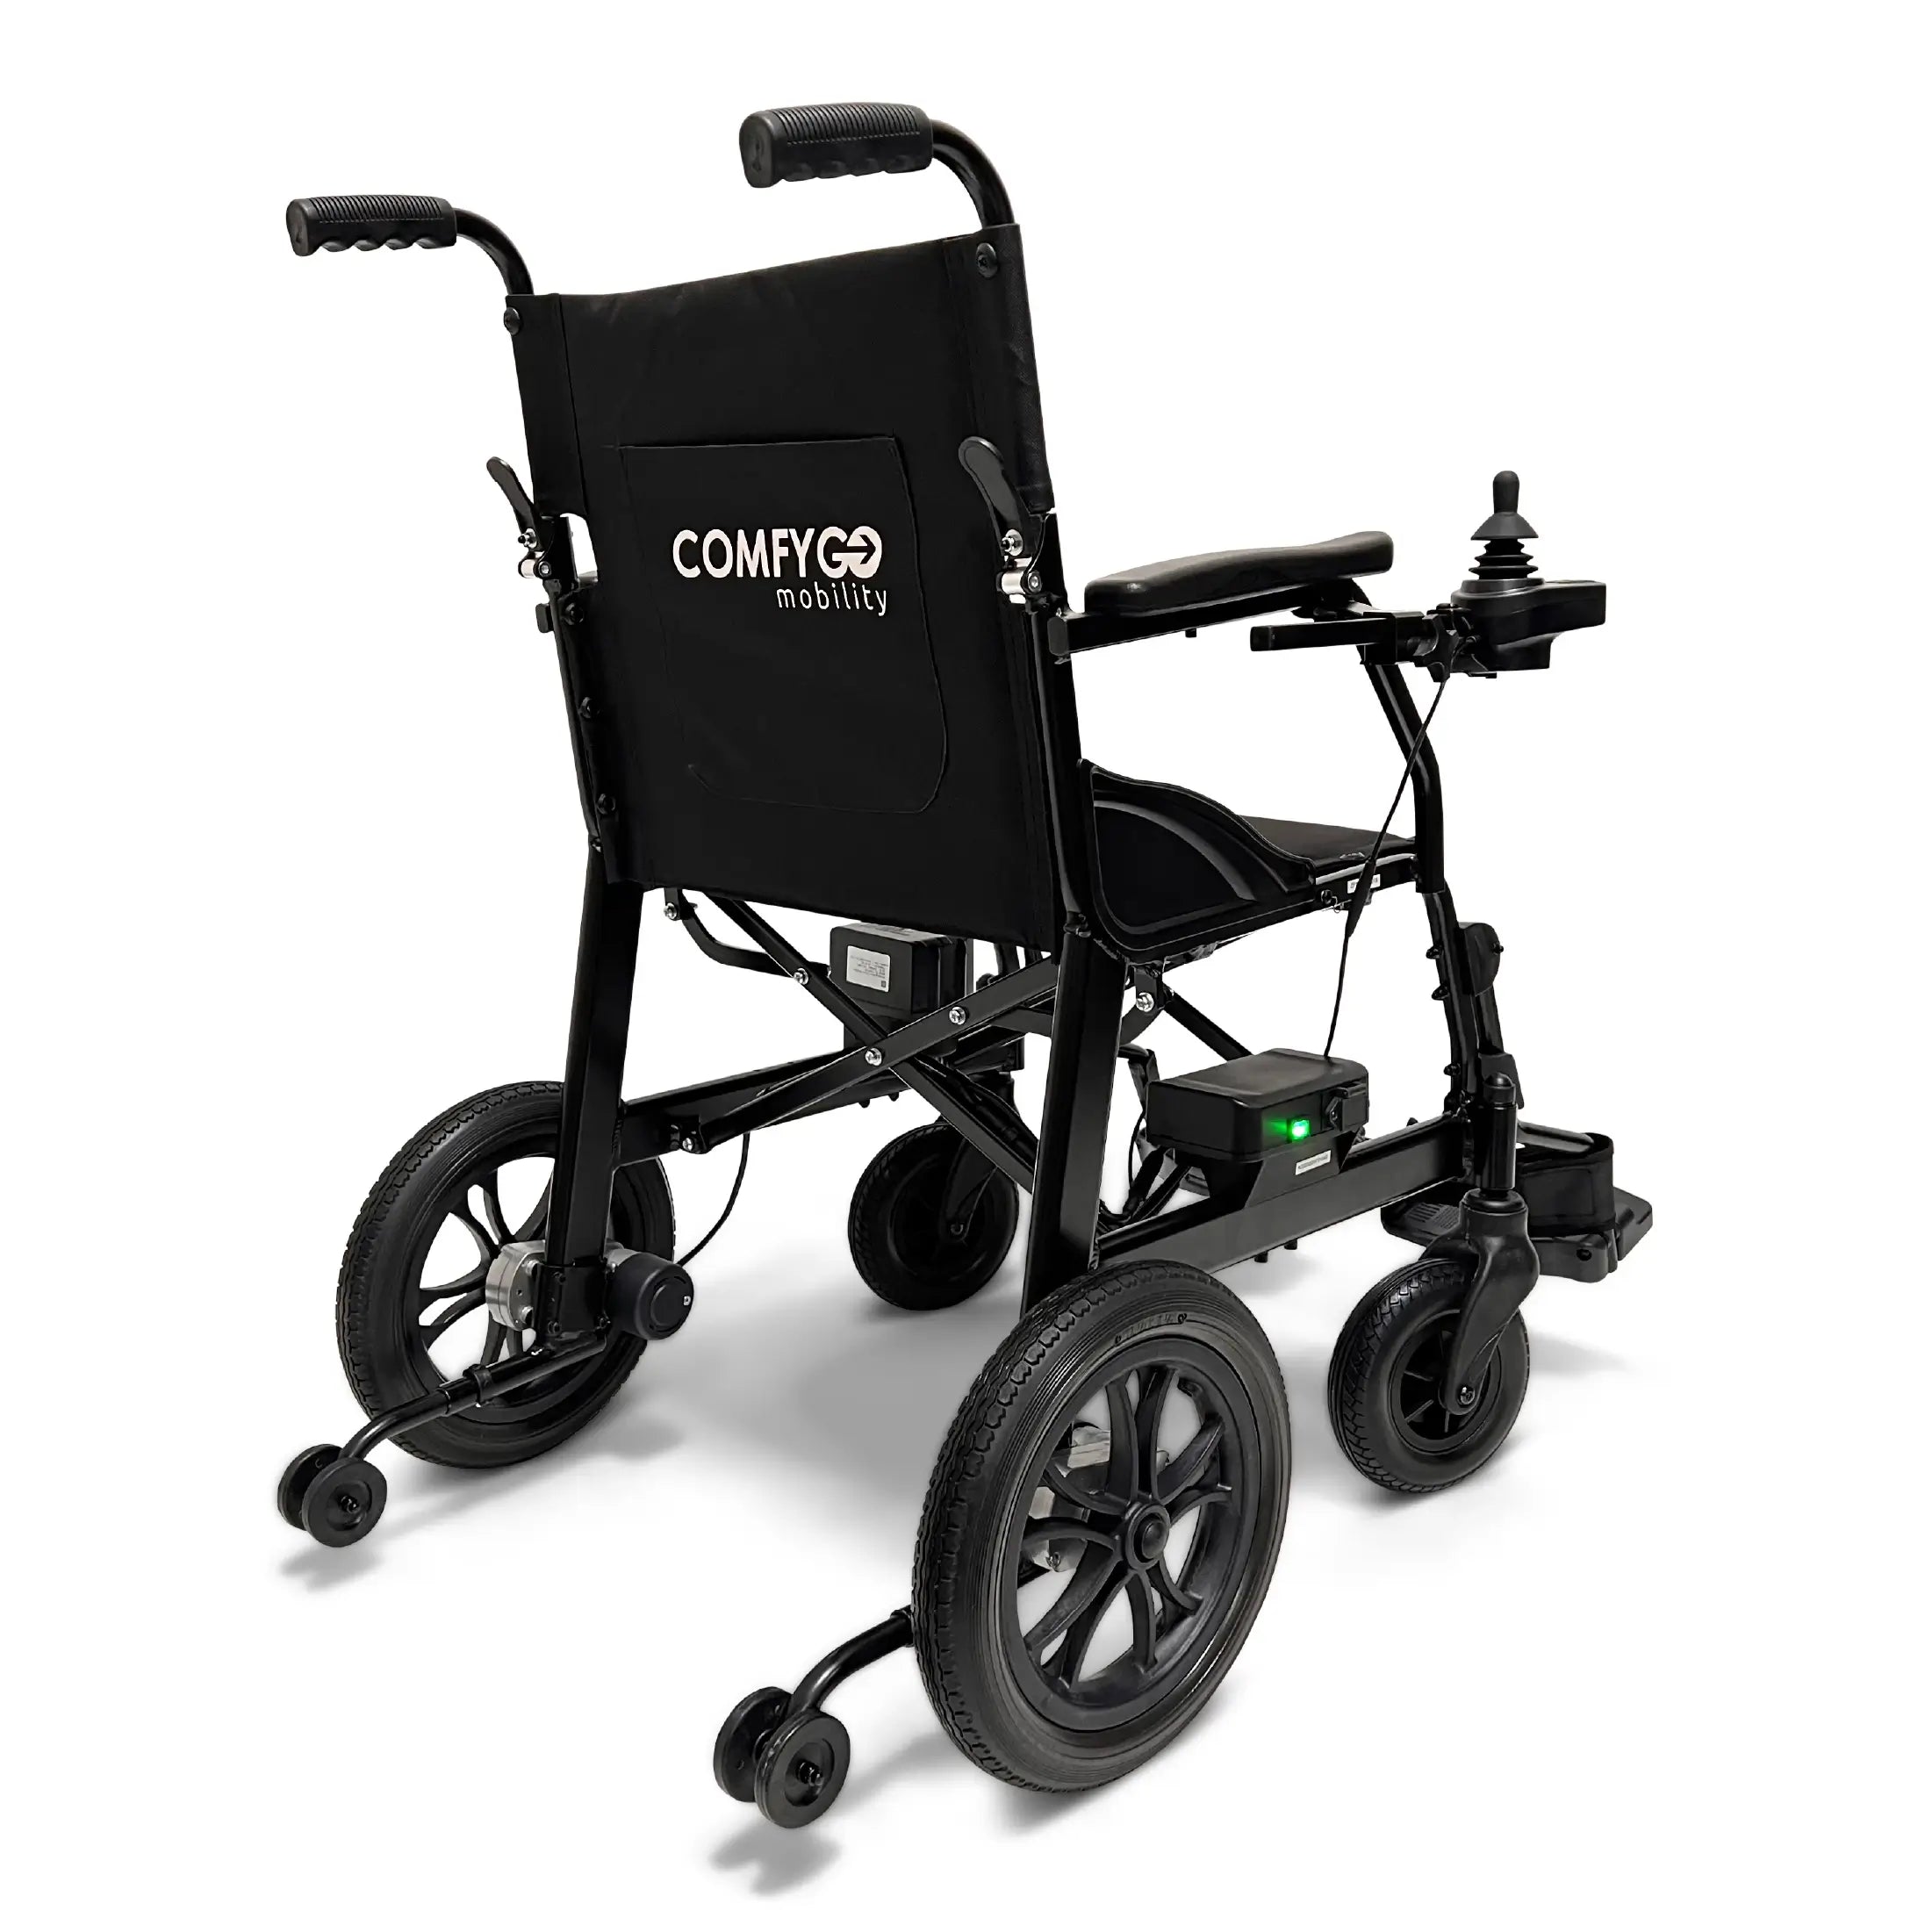 X-lite Ultra Lightweight Foldable Electric Wheelchair for Travel